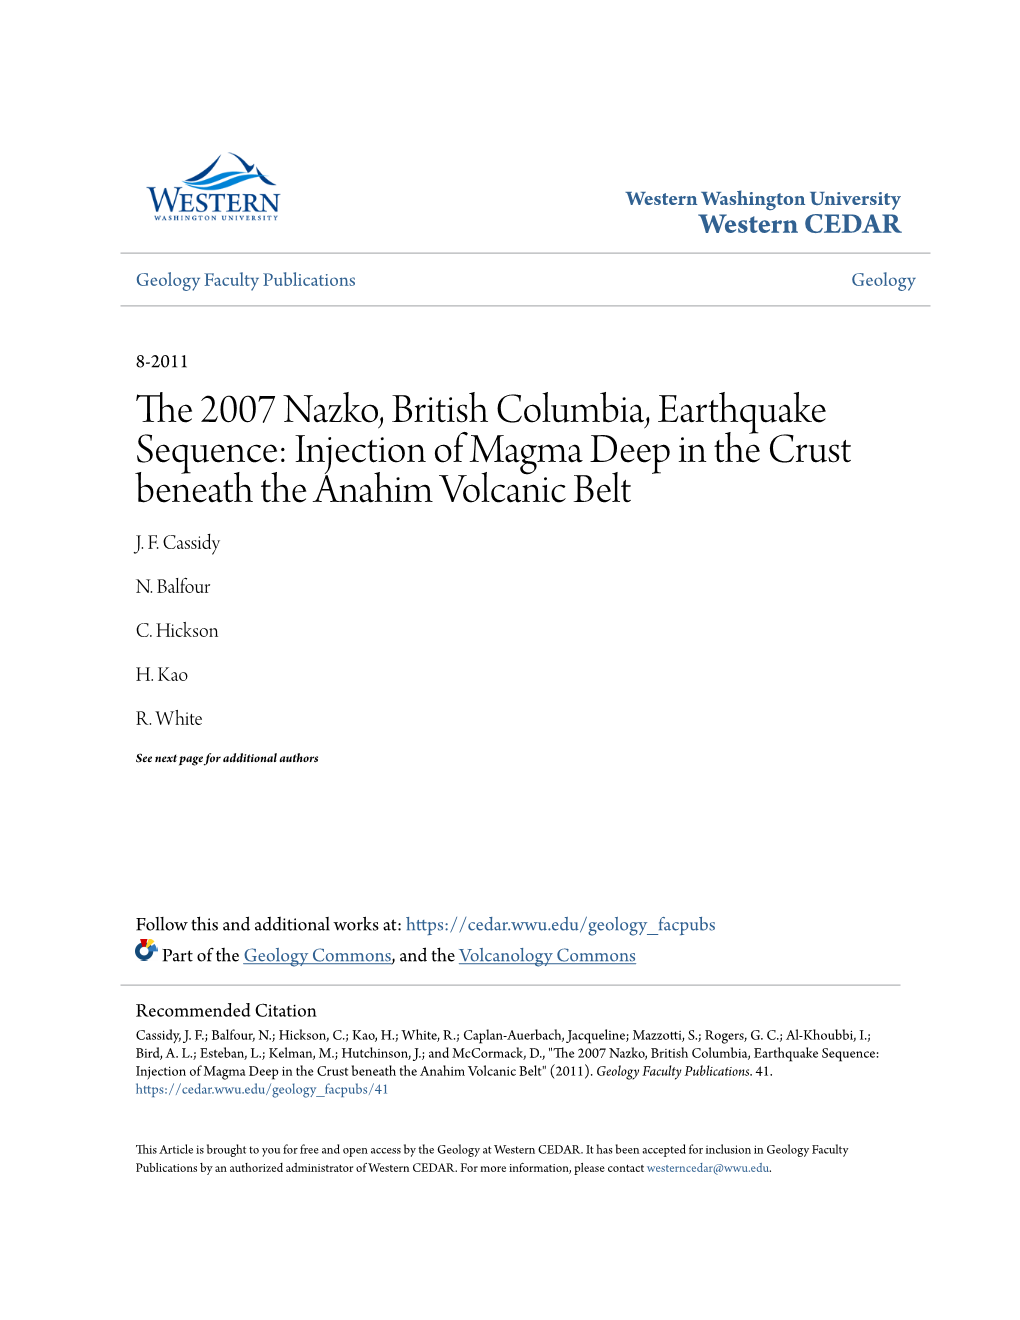 The 2007 Nazko, British Columbia, Earthquake Sequence: Injection of Magma Deep in the Crust Beneath the Anahim Volcanic Belt by J